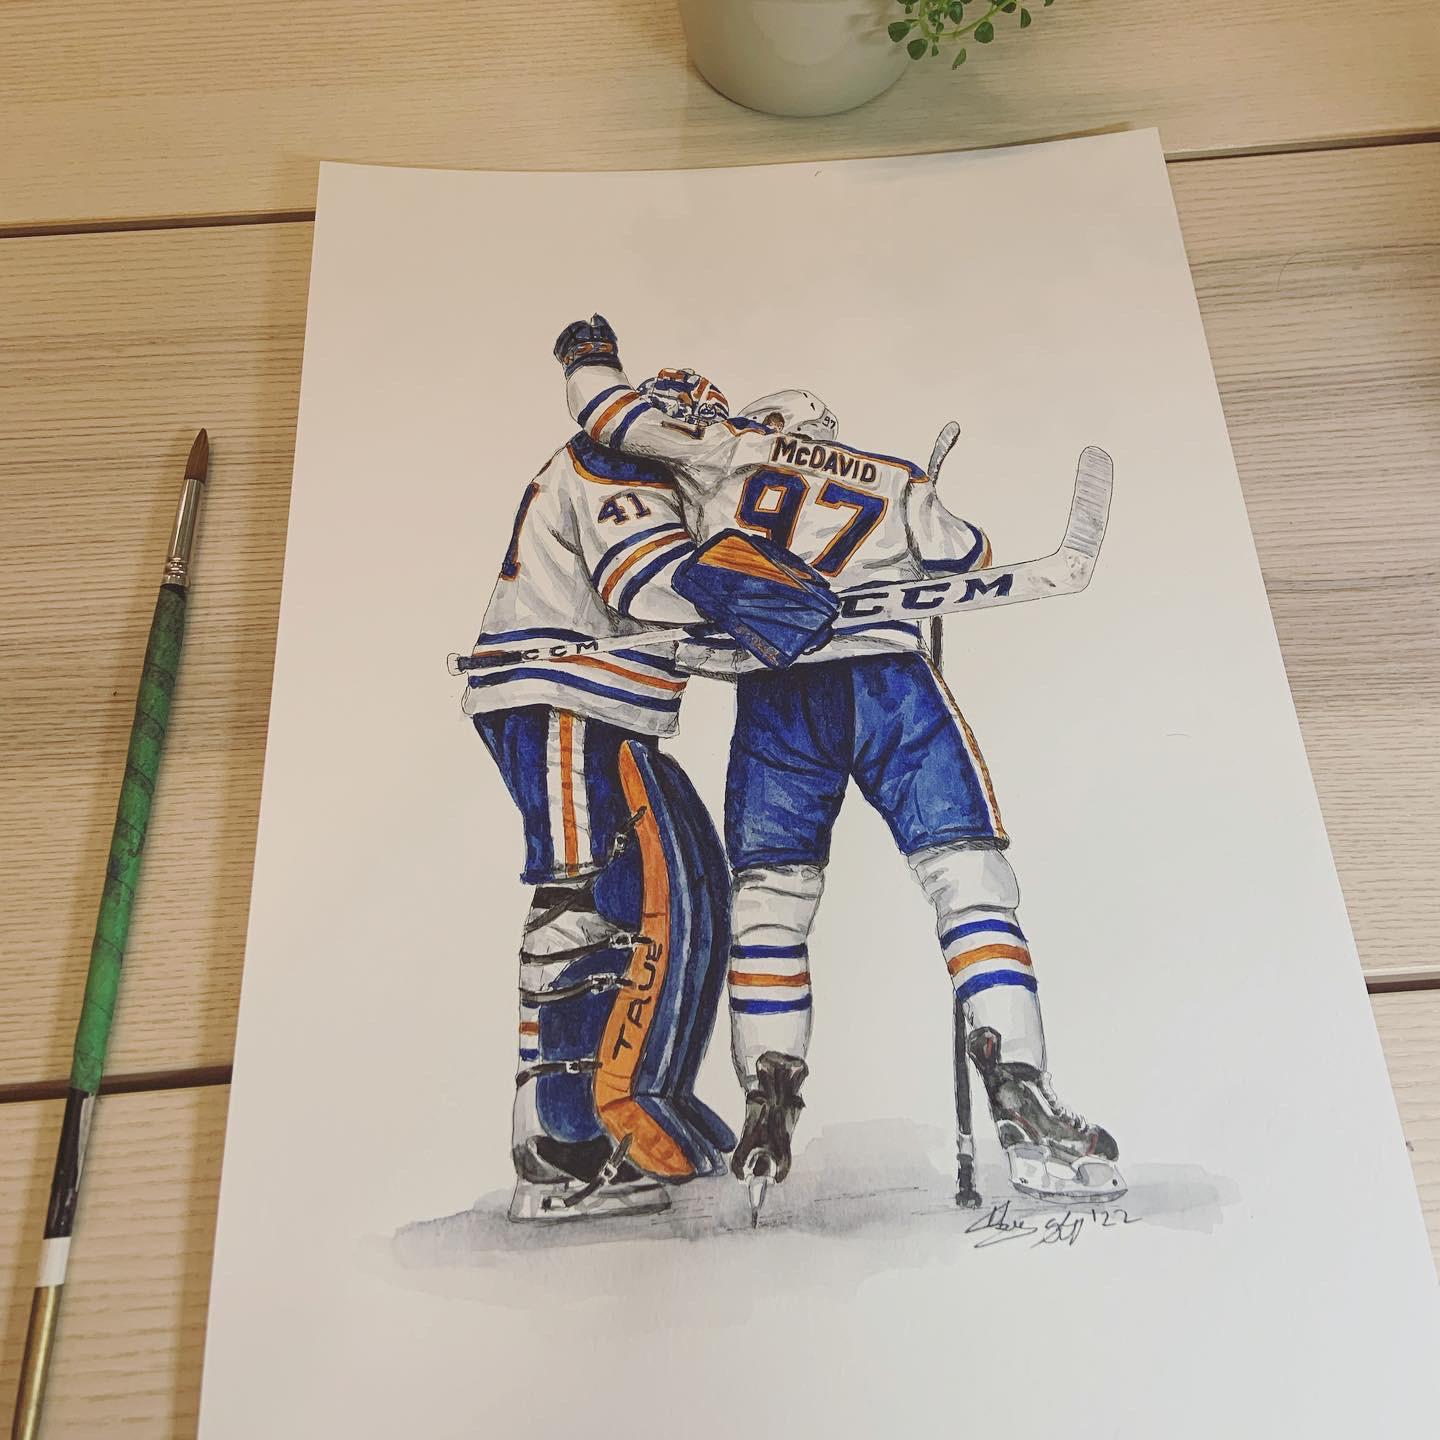 After watching McDavid’s OT goal assisted by Mike Smith a few weeks ago, I was inspired to paint them together celebrating their victory. The Oilers put everything they’ve got into each game and it’s amazing to watch a team play well together. 🏒🙌 🎨